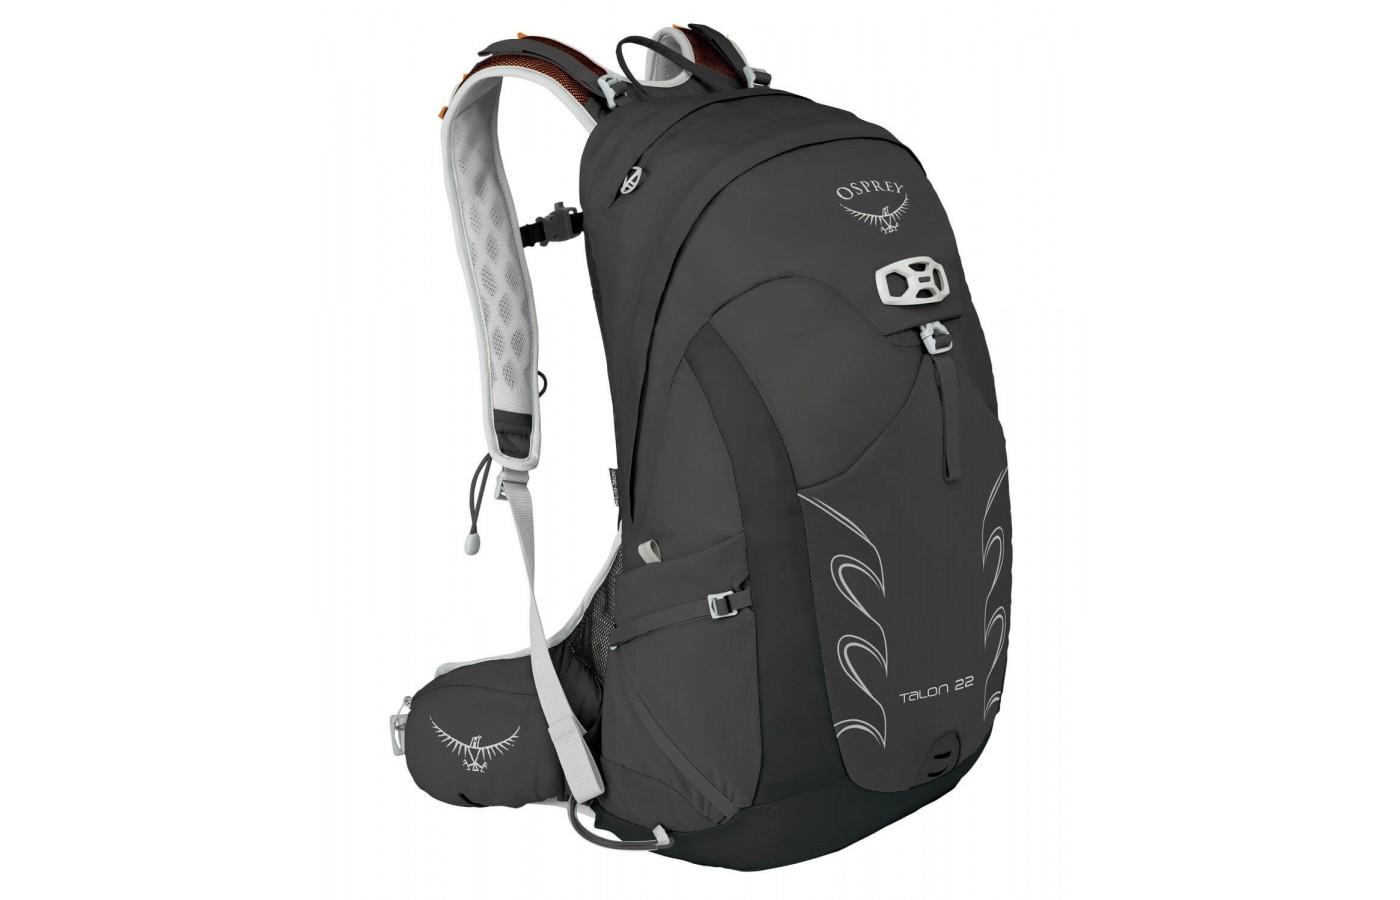 The Osprey Talon 22 features a total of 7 exterior pockets